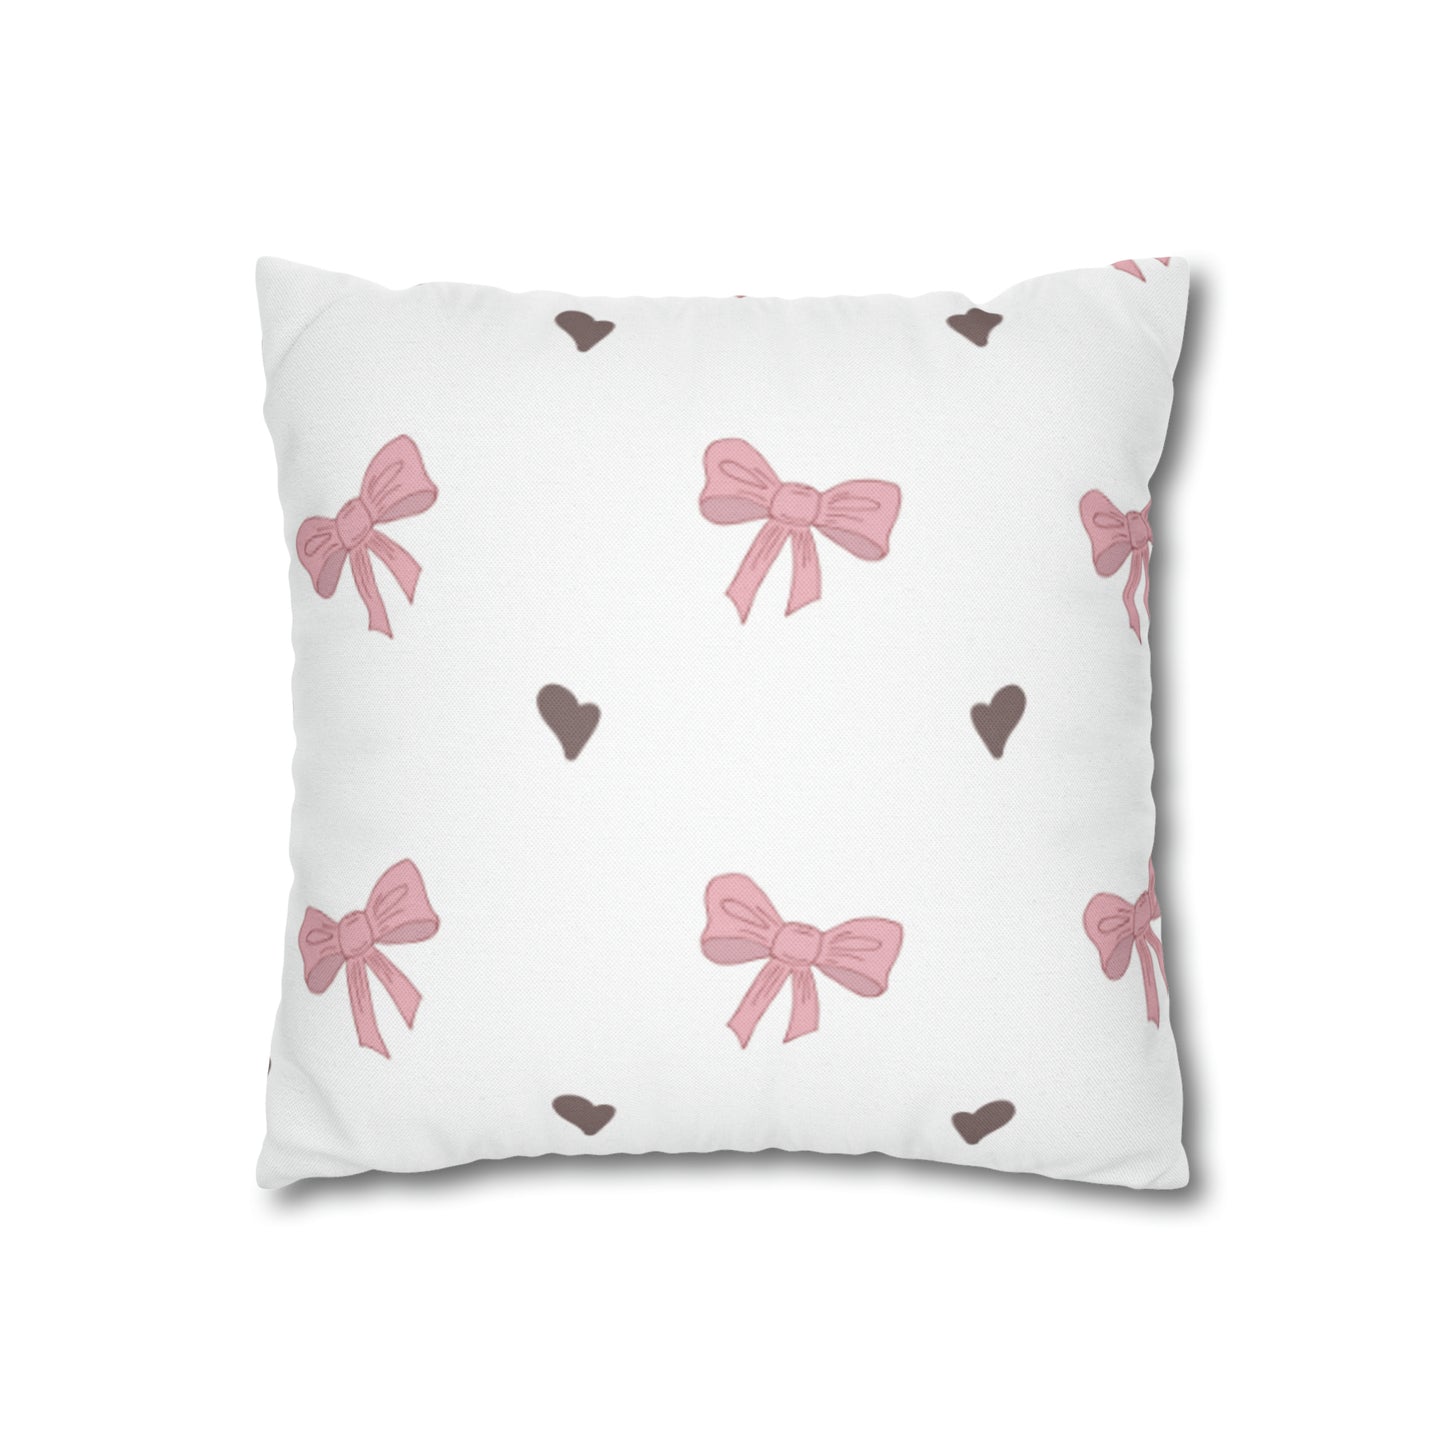 Bows N' Hearts Square Pillow Case